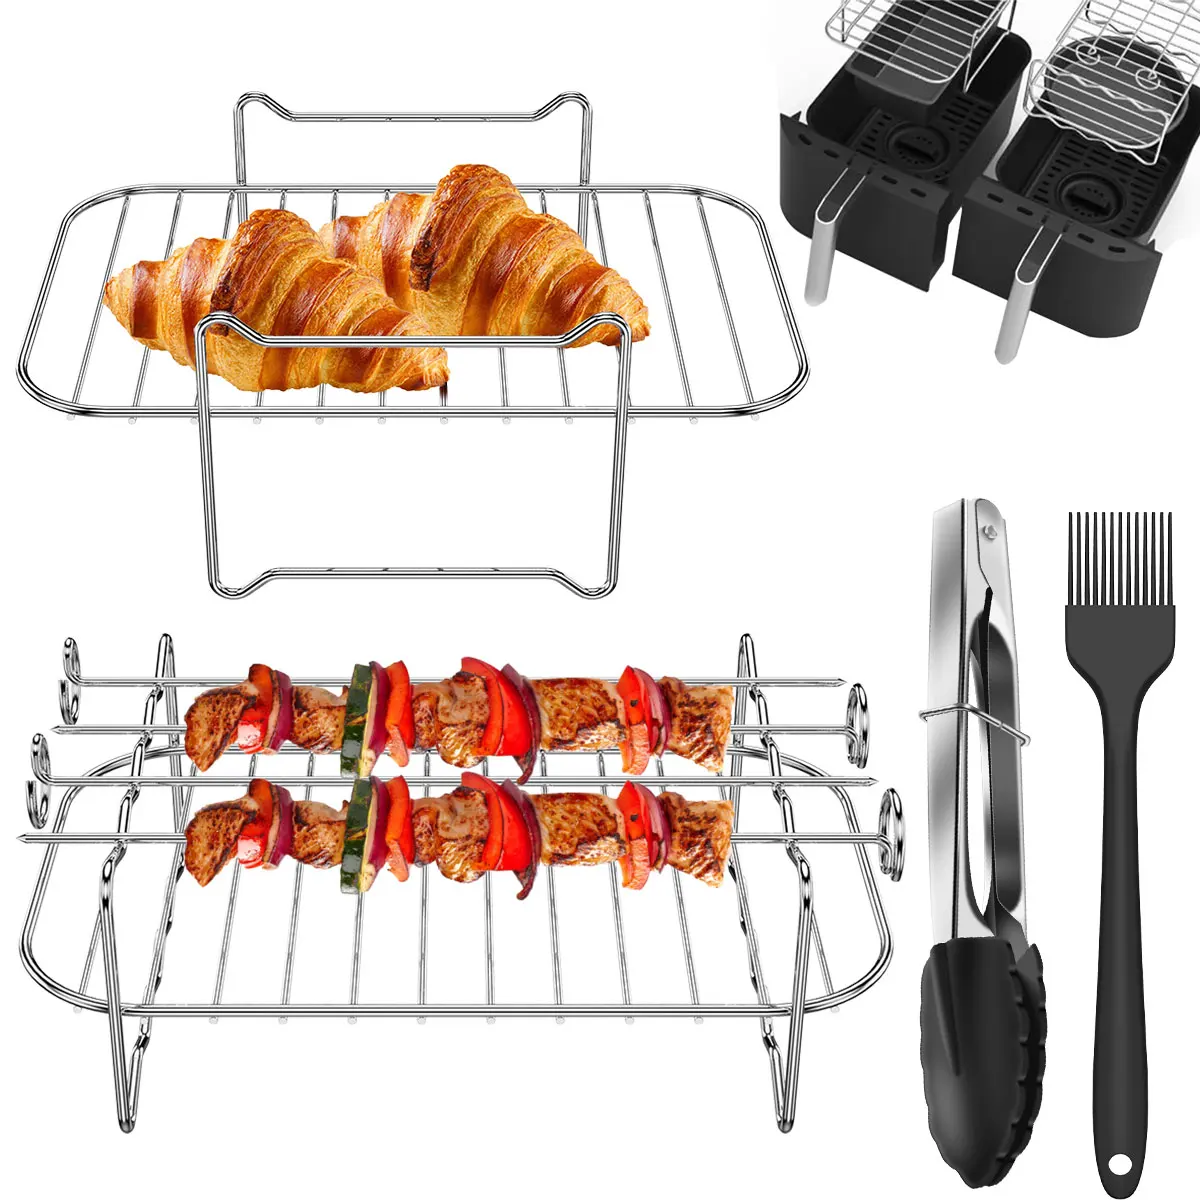 https://ae01.alicdn.com/kf/Sdc7328aac41b4fefb1d285e73fdc1759t/Stainless-Steel-Multifunctional-Roasting-Rack-Compatible-Airfryer-Dehydrator-BBQ-Rack-Steamer-Roasting-for-Air-Fryer-Accessories.jpg